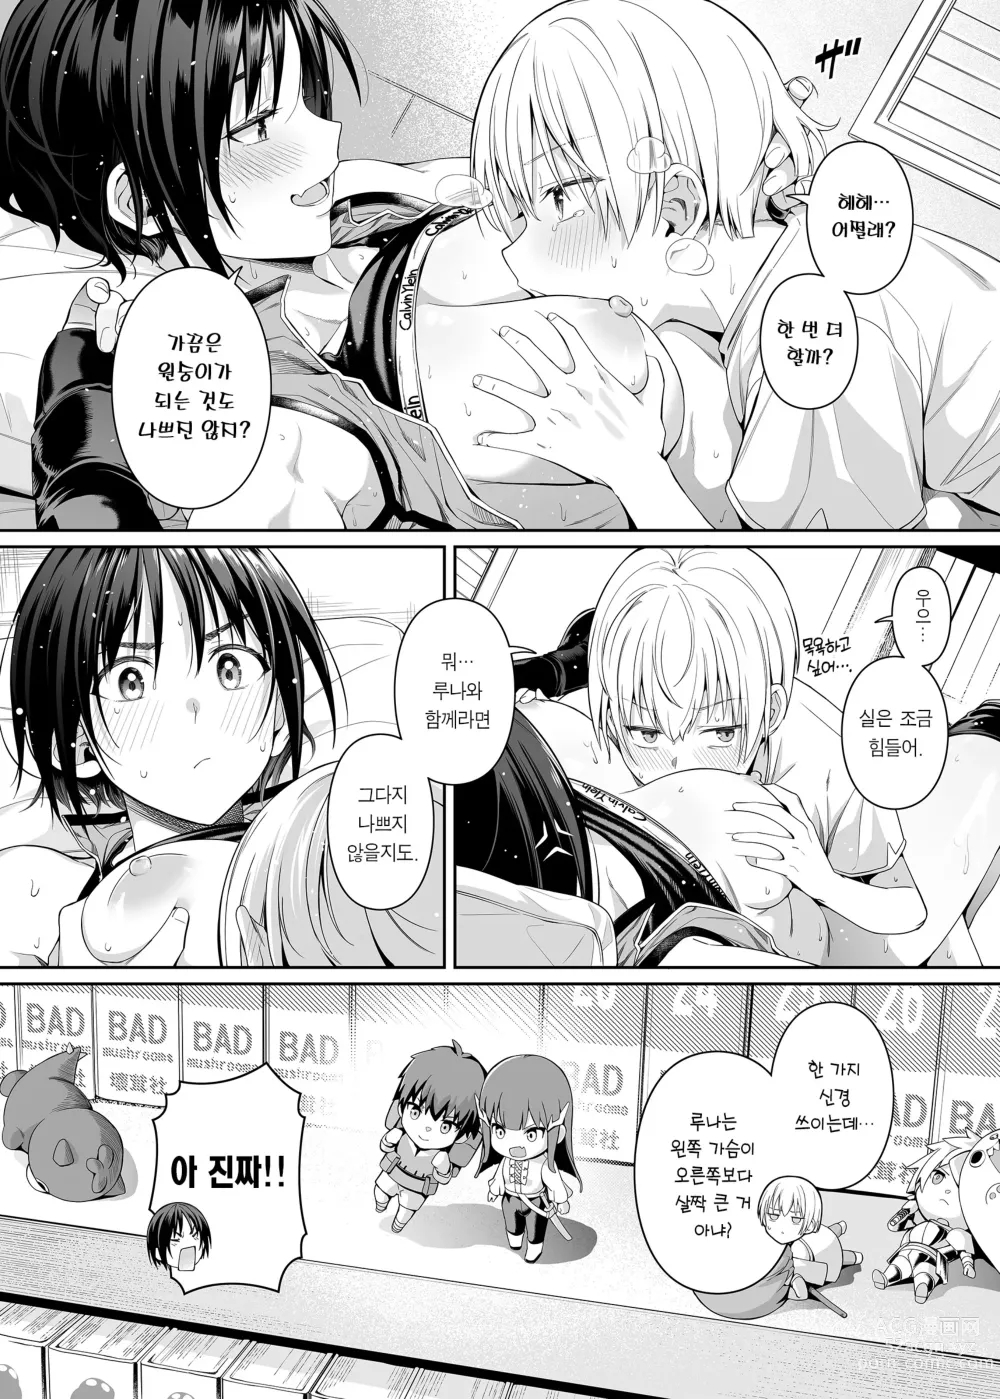 Page 41 of doujinshi 강박성 욕망